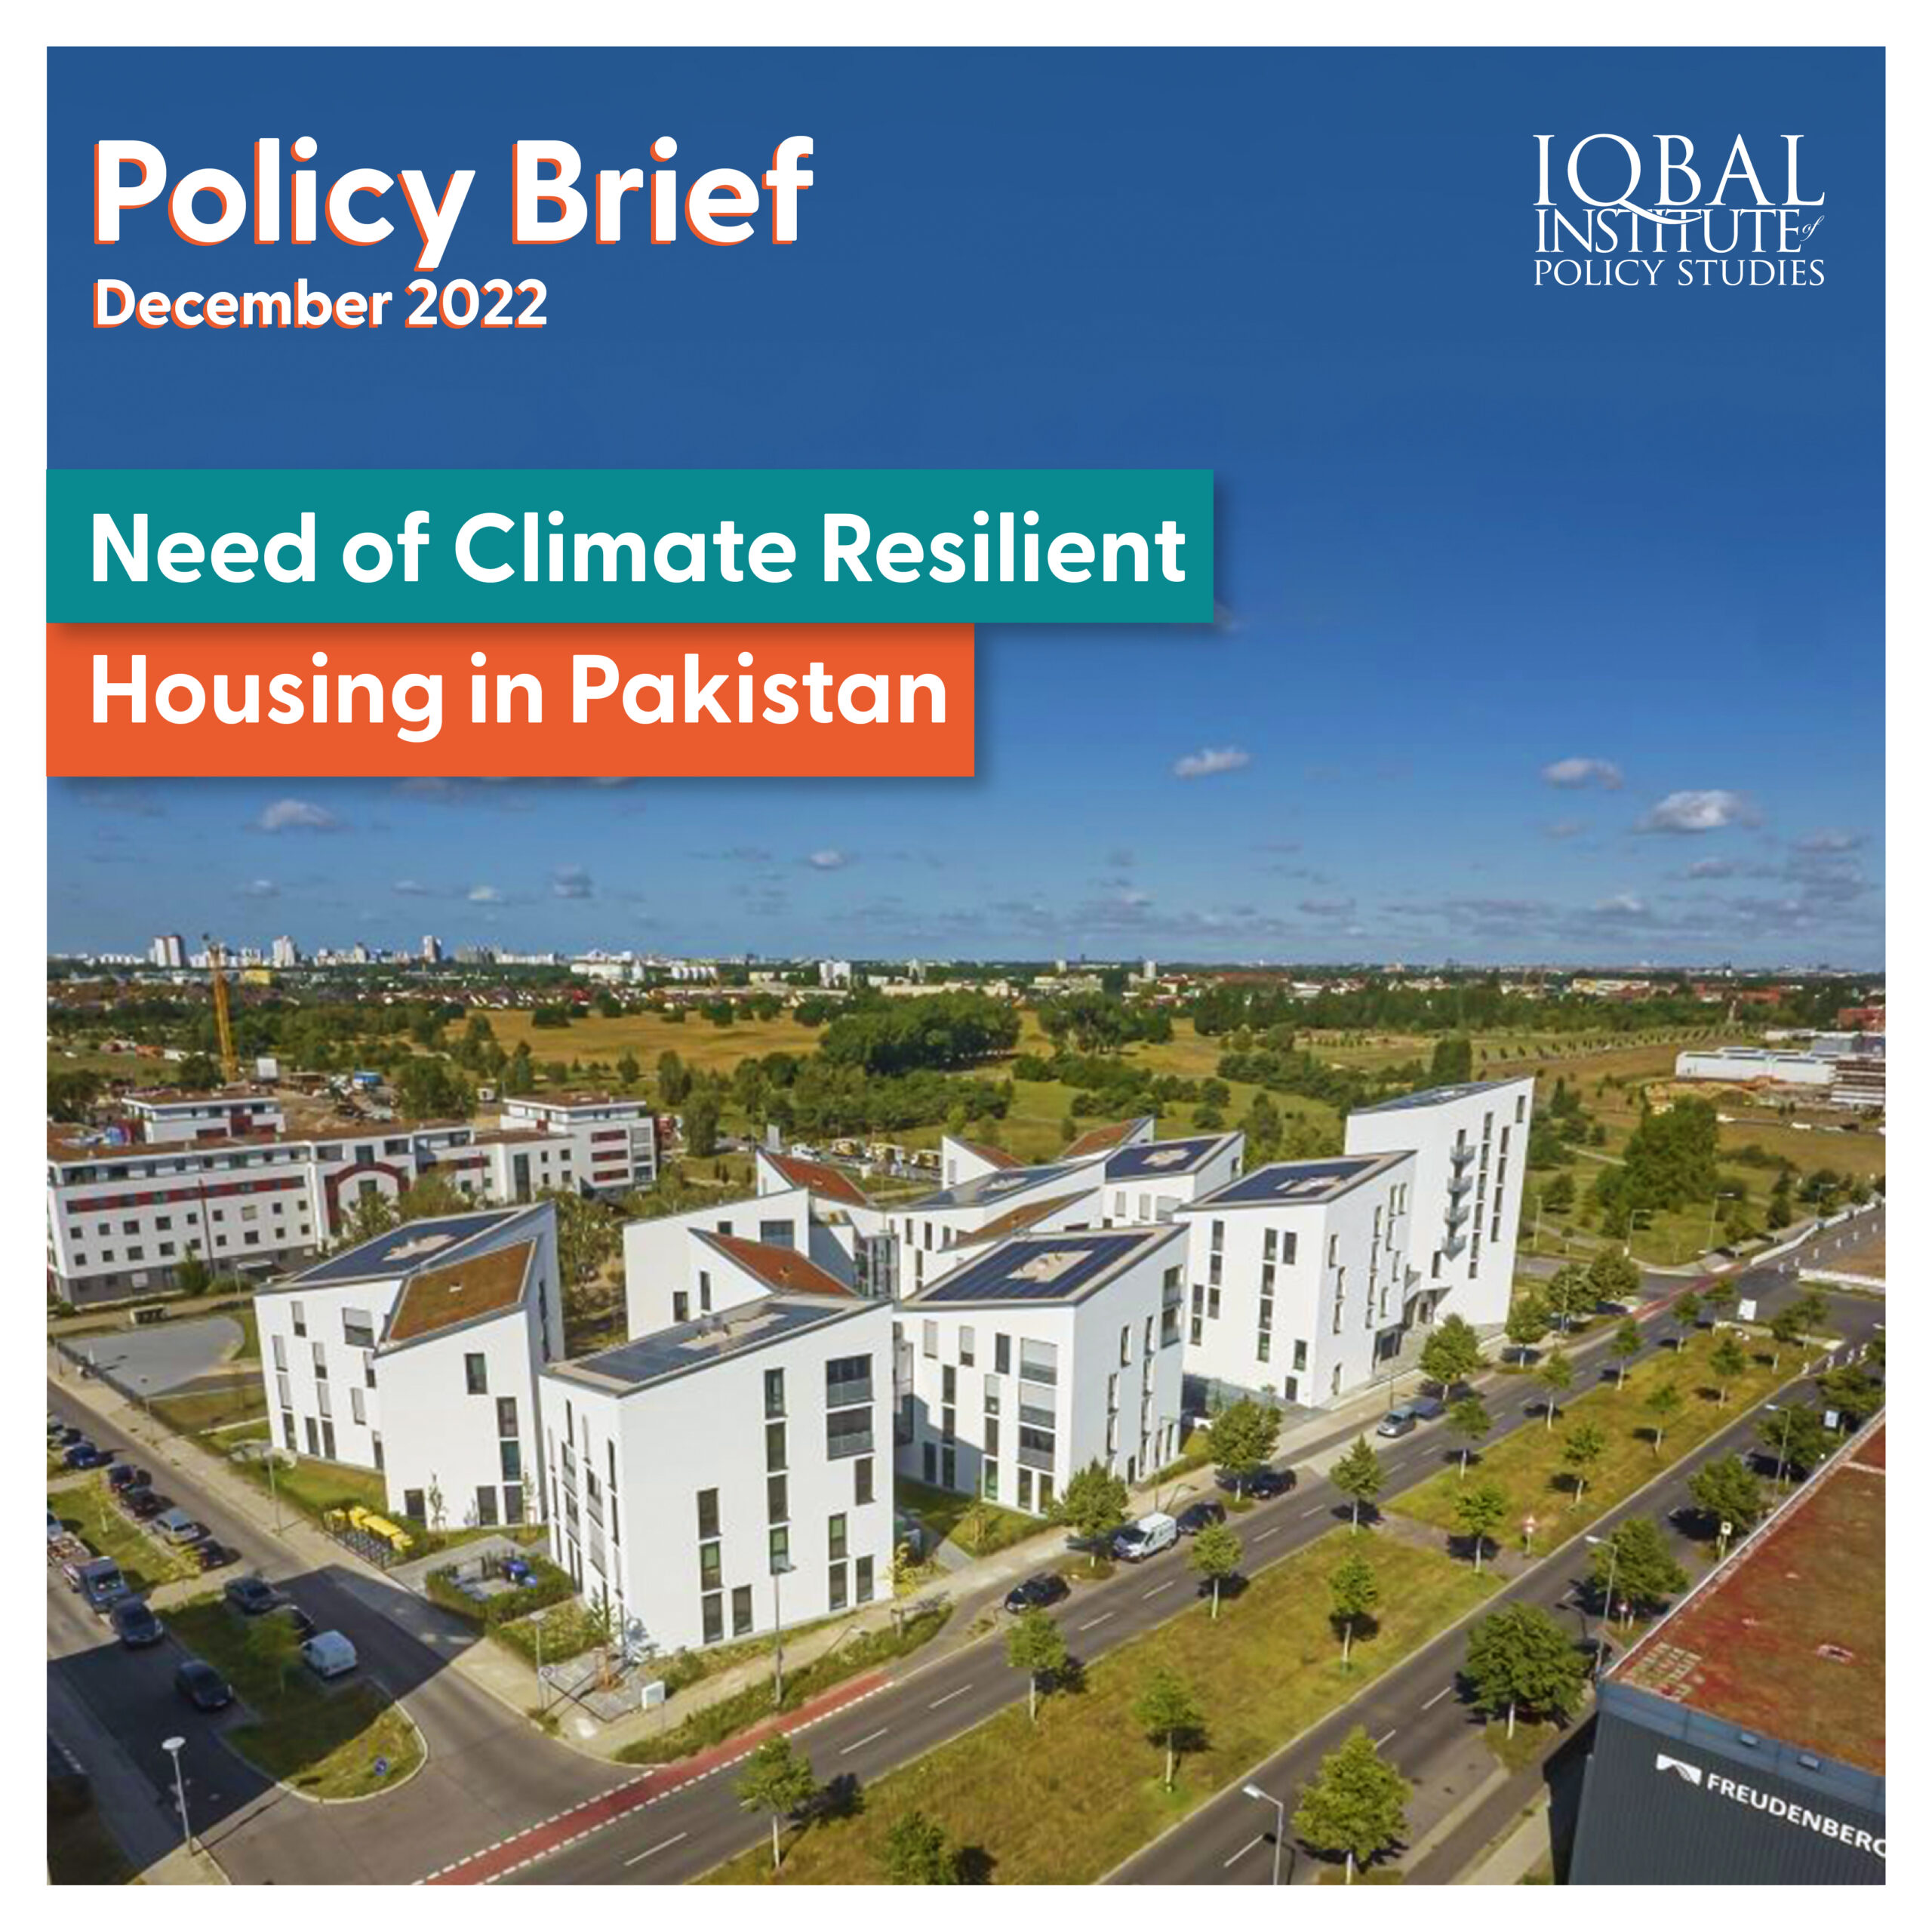 Need of Climate Resilient Housing in Pakistan